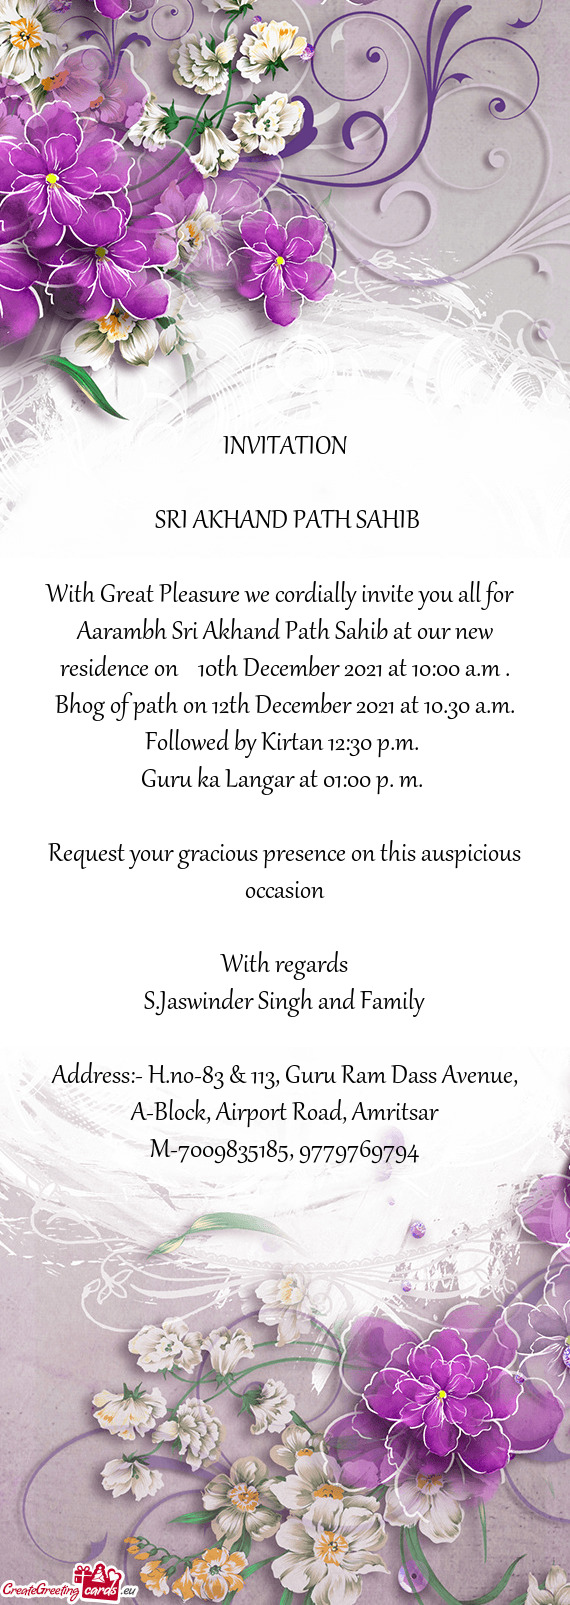 Aarambh Sri Akhand Path Sahib at our new residence on 10th December 2021 at 10:00 a.m